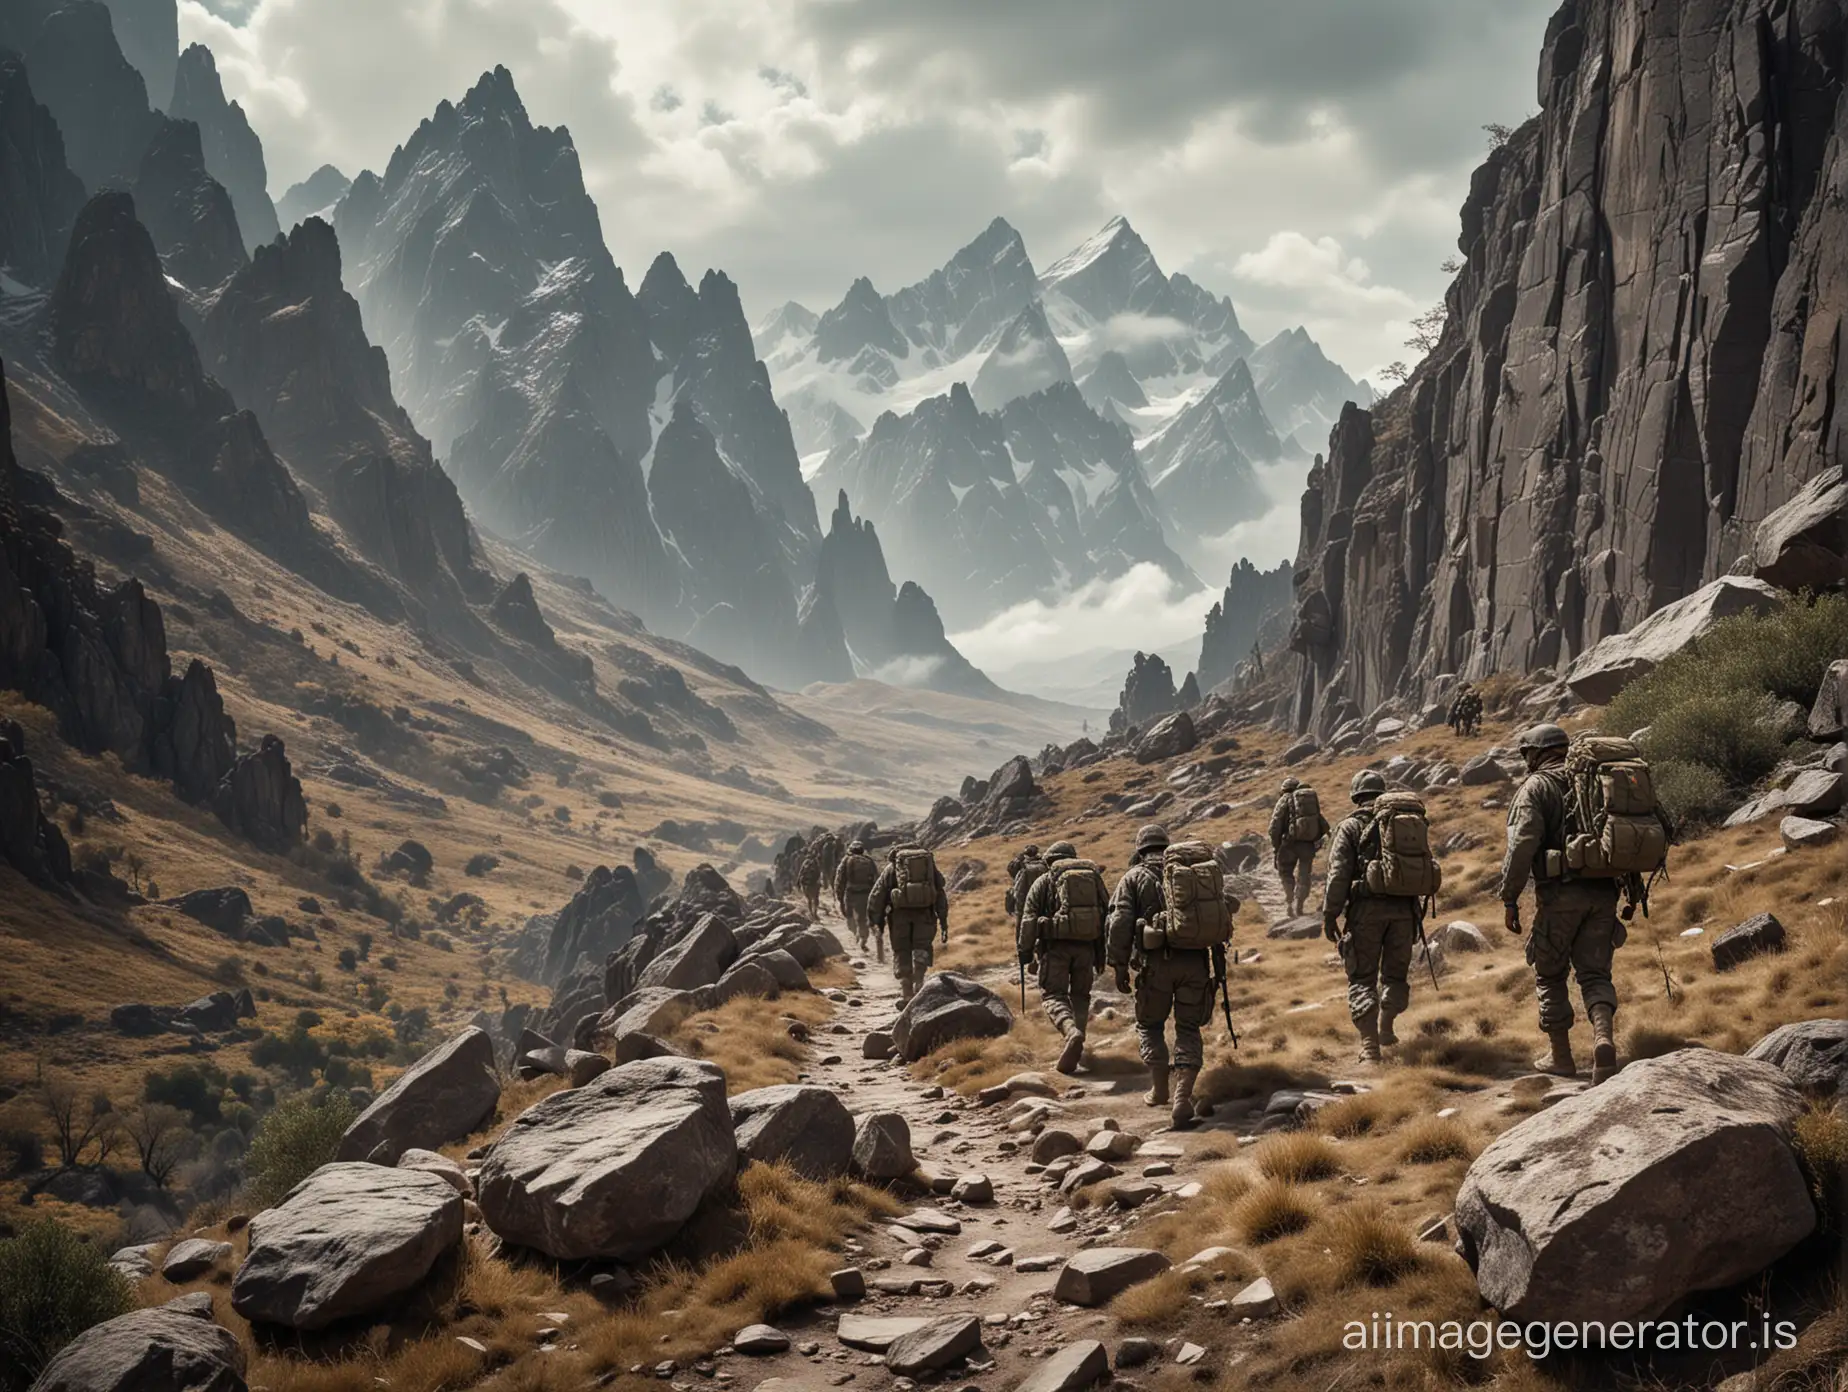 "Army in the mountains" - A scene depicting rugged, mountainous terrain with soldiers in camouflage uniforms navigating through rocky paths. The soldiers are carrying equipment and are strategically positioned amidst the mountains. The landscape is characterized by jagged peaks, rocky cliffs, and sparse vegetation. In the background, misty clouds partially obscure the higher peaks, adding to the sense of depth and scale. The overall atmosphere is one of tension and readiness as the soldiers move through the challenging terrain.